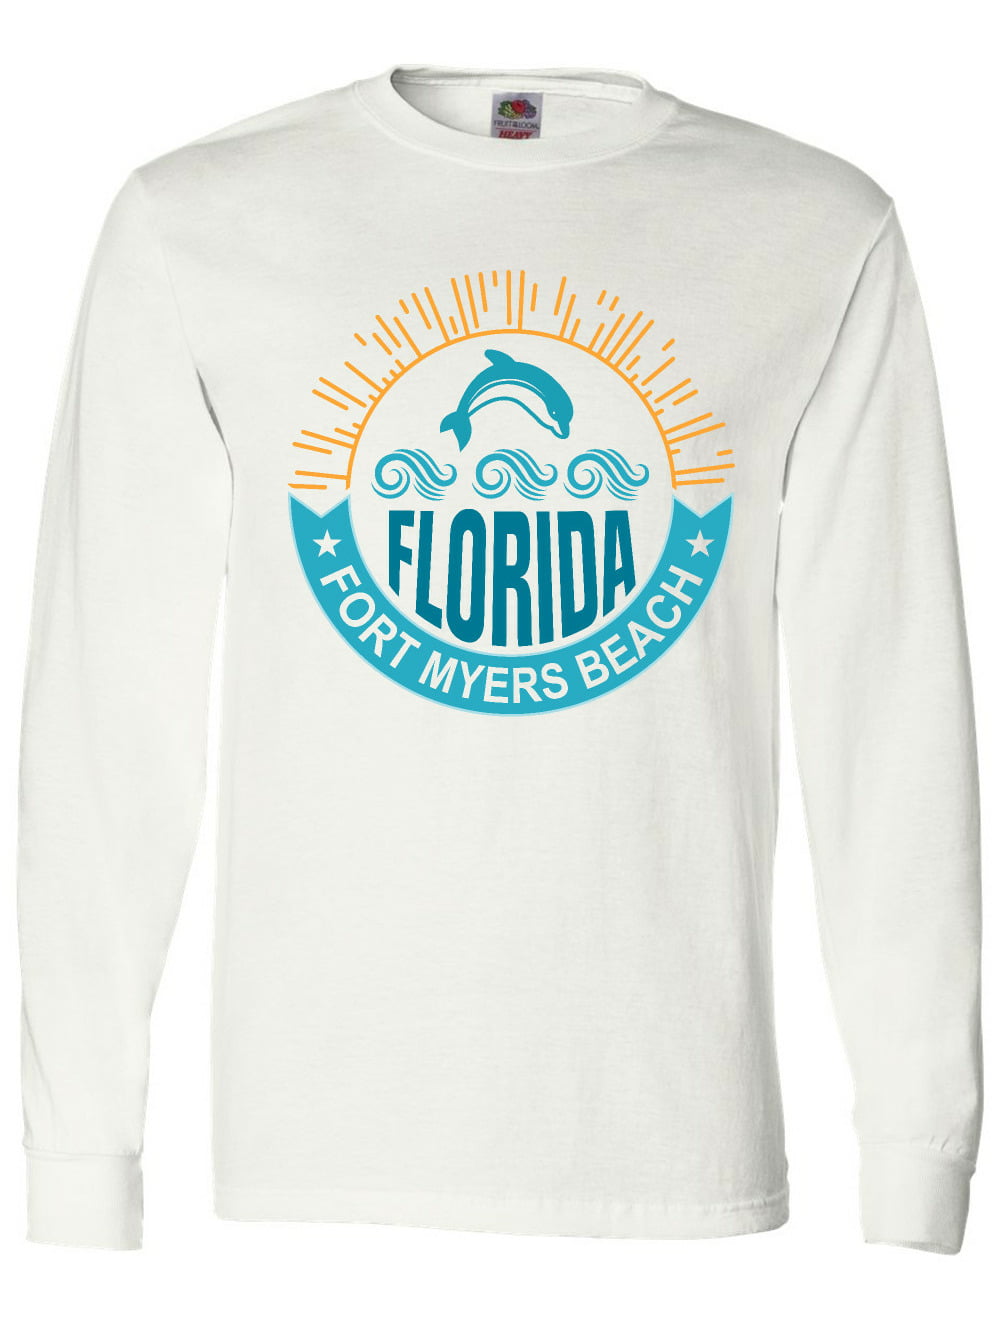 MED T-SHIRT-FORT MYERS FLORIDA-WATERWAYS COLLECTION-White-LG 40% OFF! 